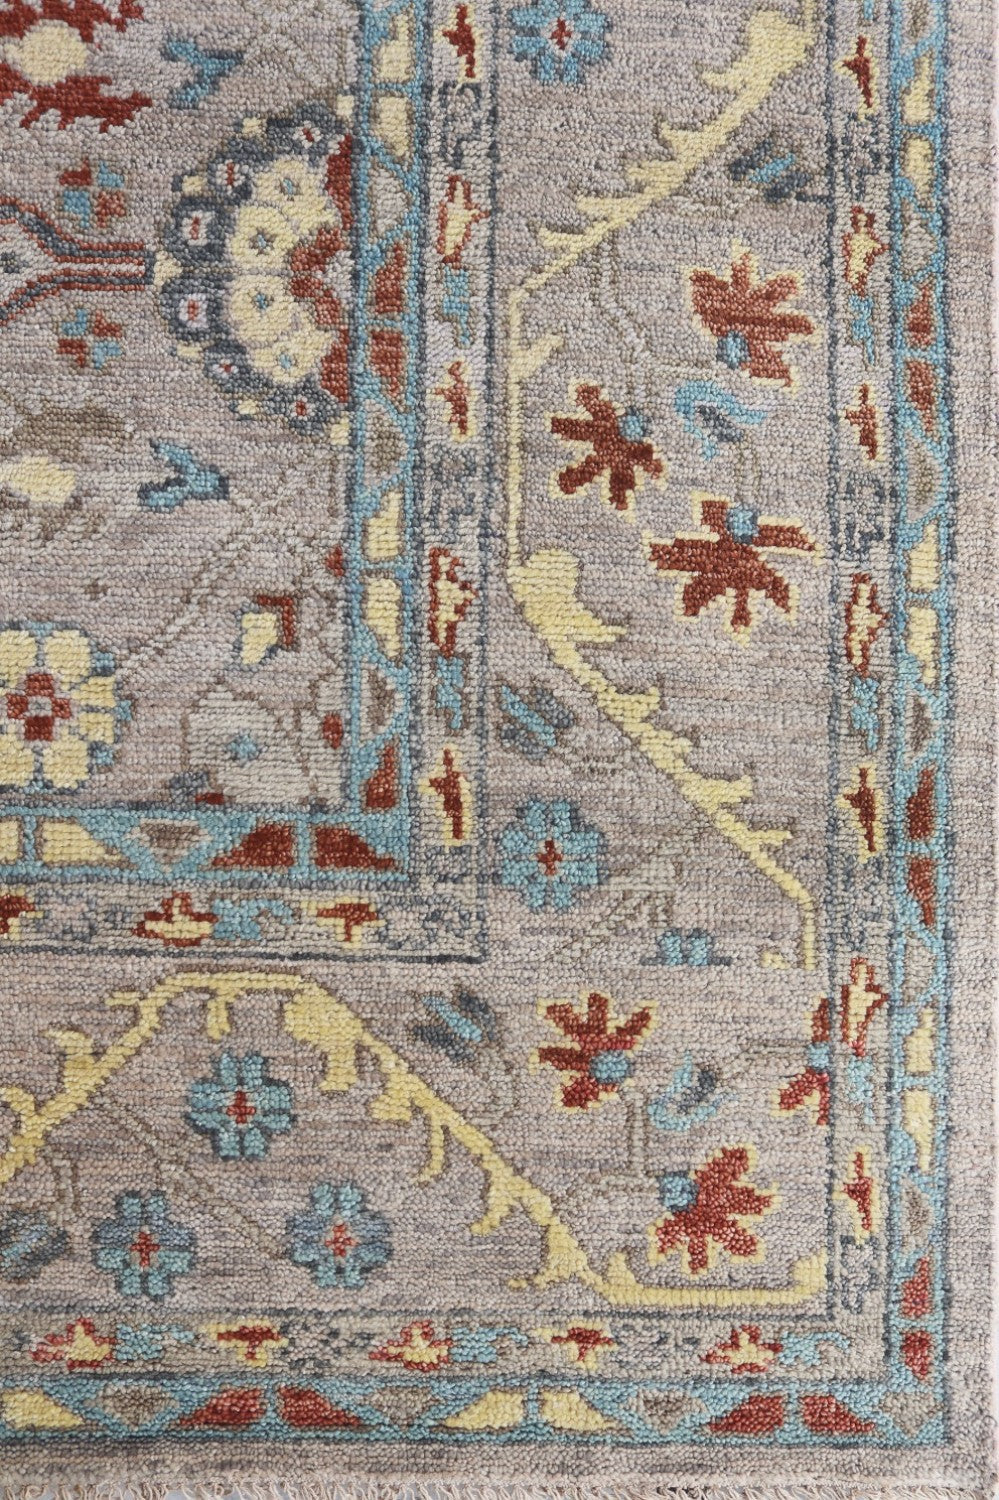 Sultanabad 2 Handwoven Traditional Rug, J71545